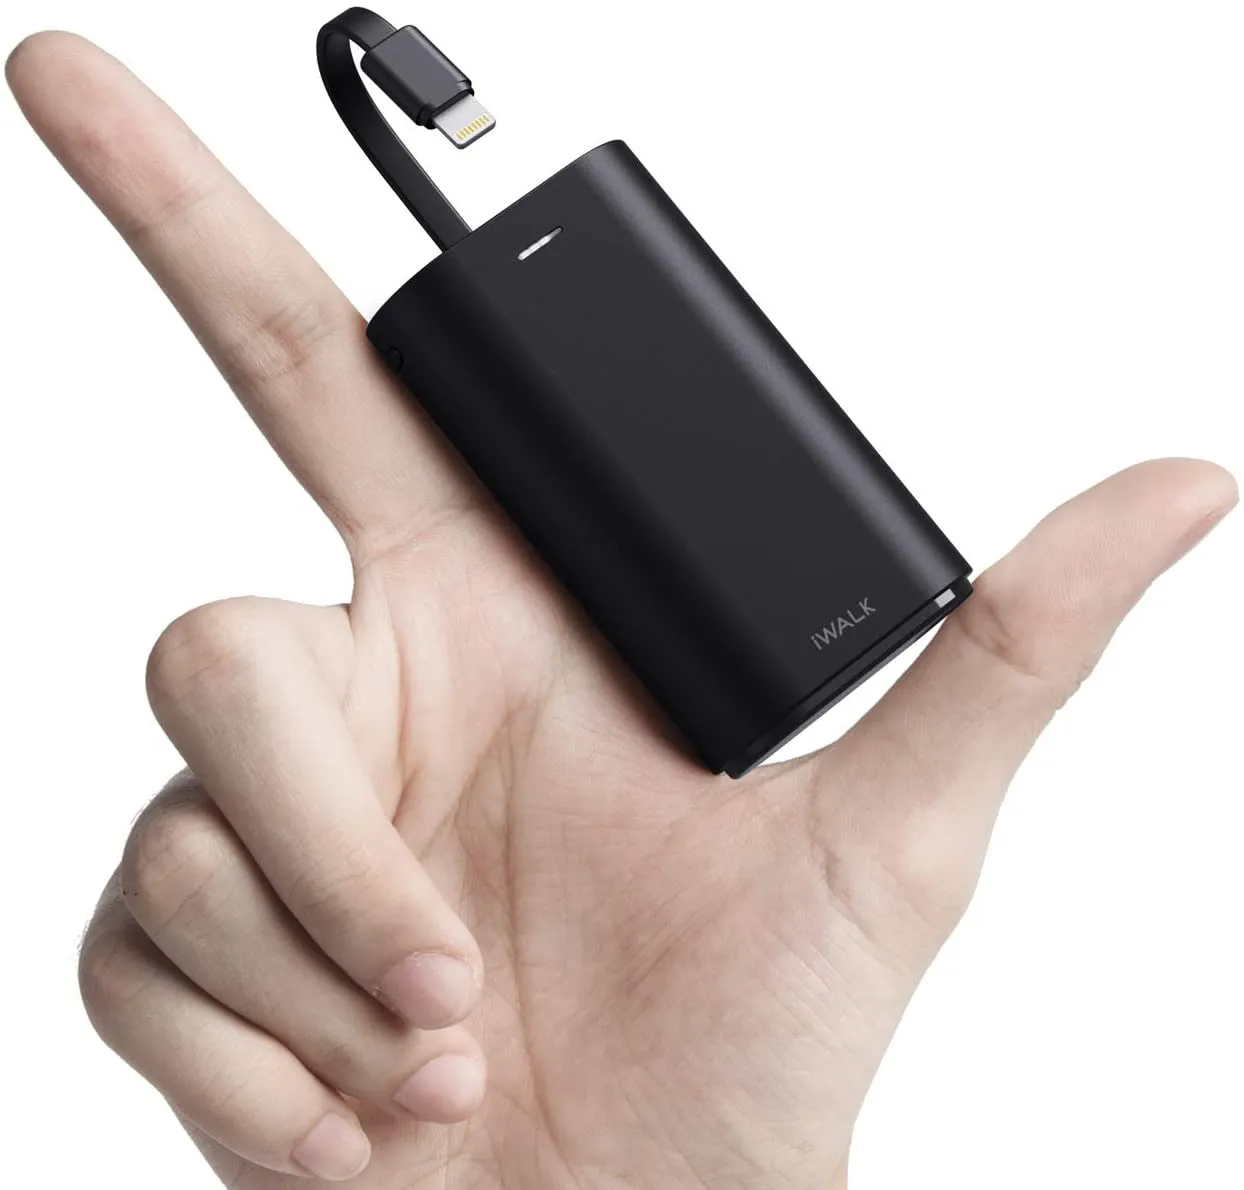 Mini Portable Charger for iPhone with Built-in Cable